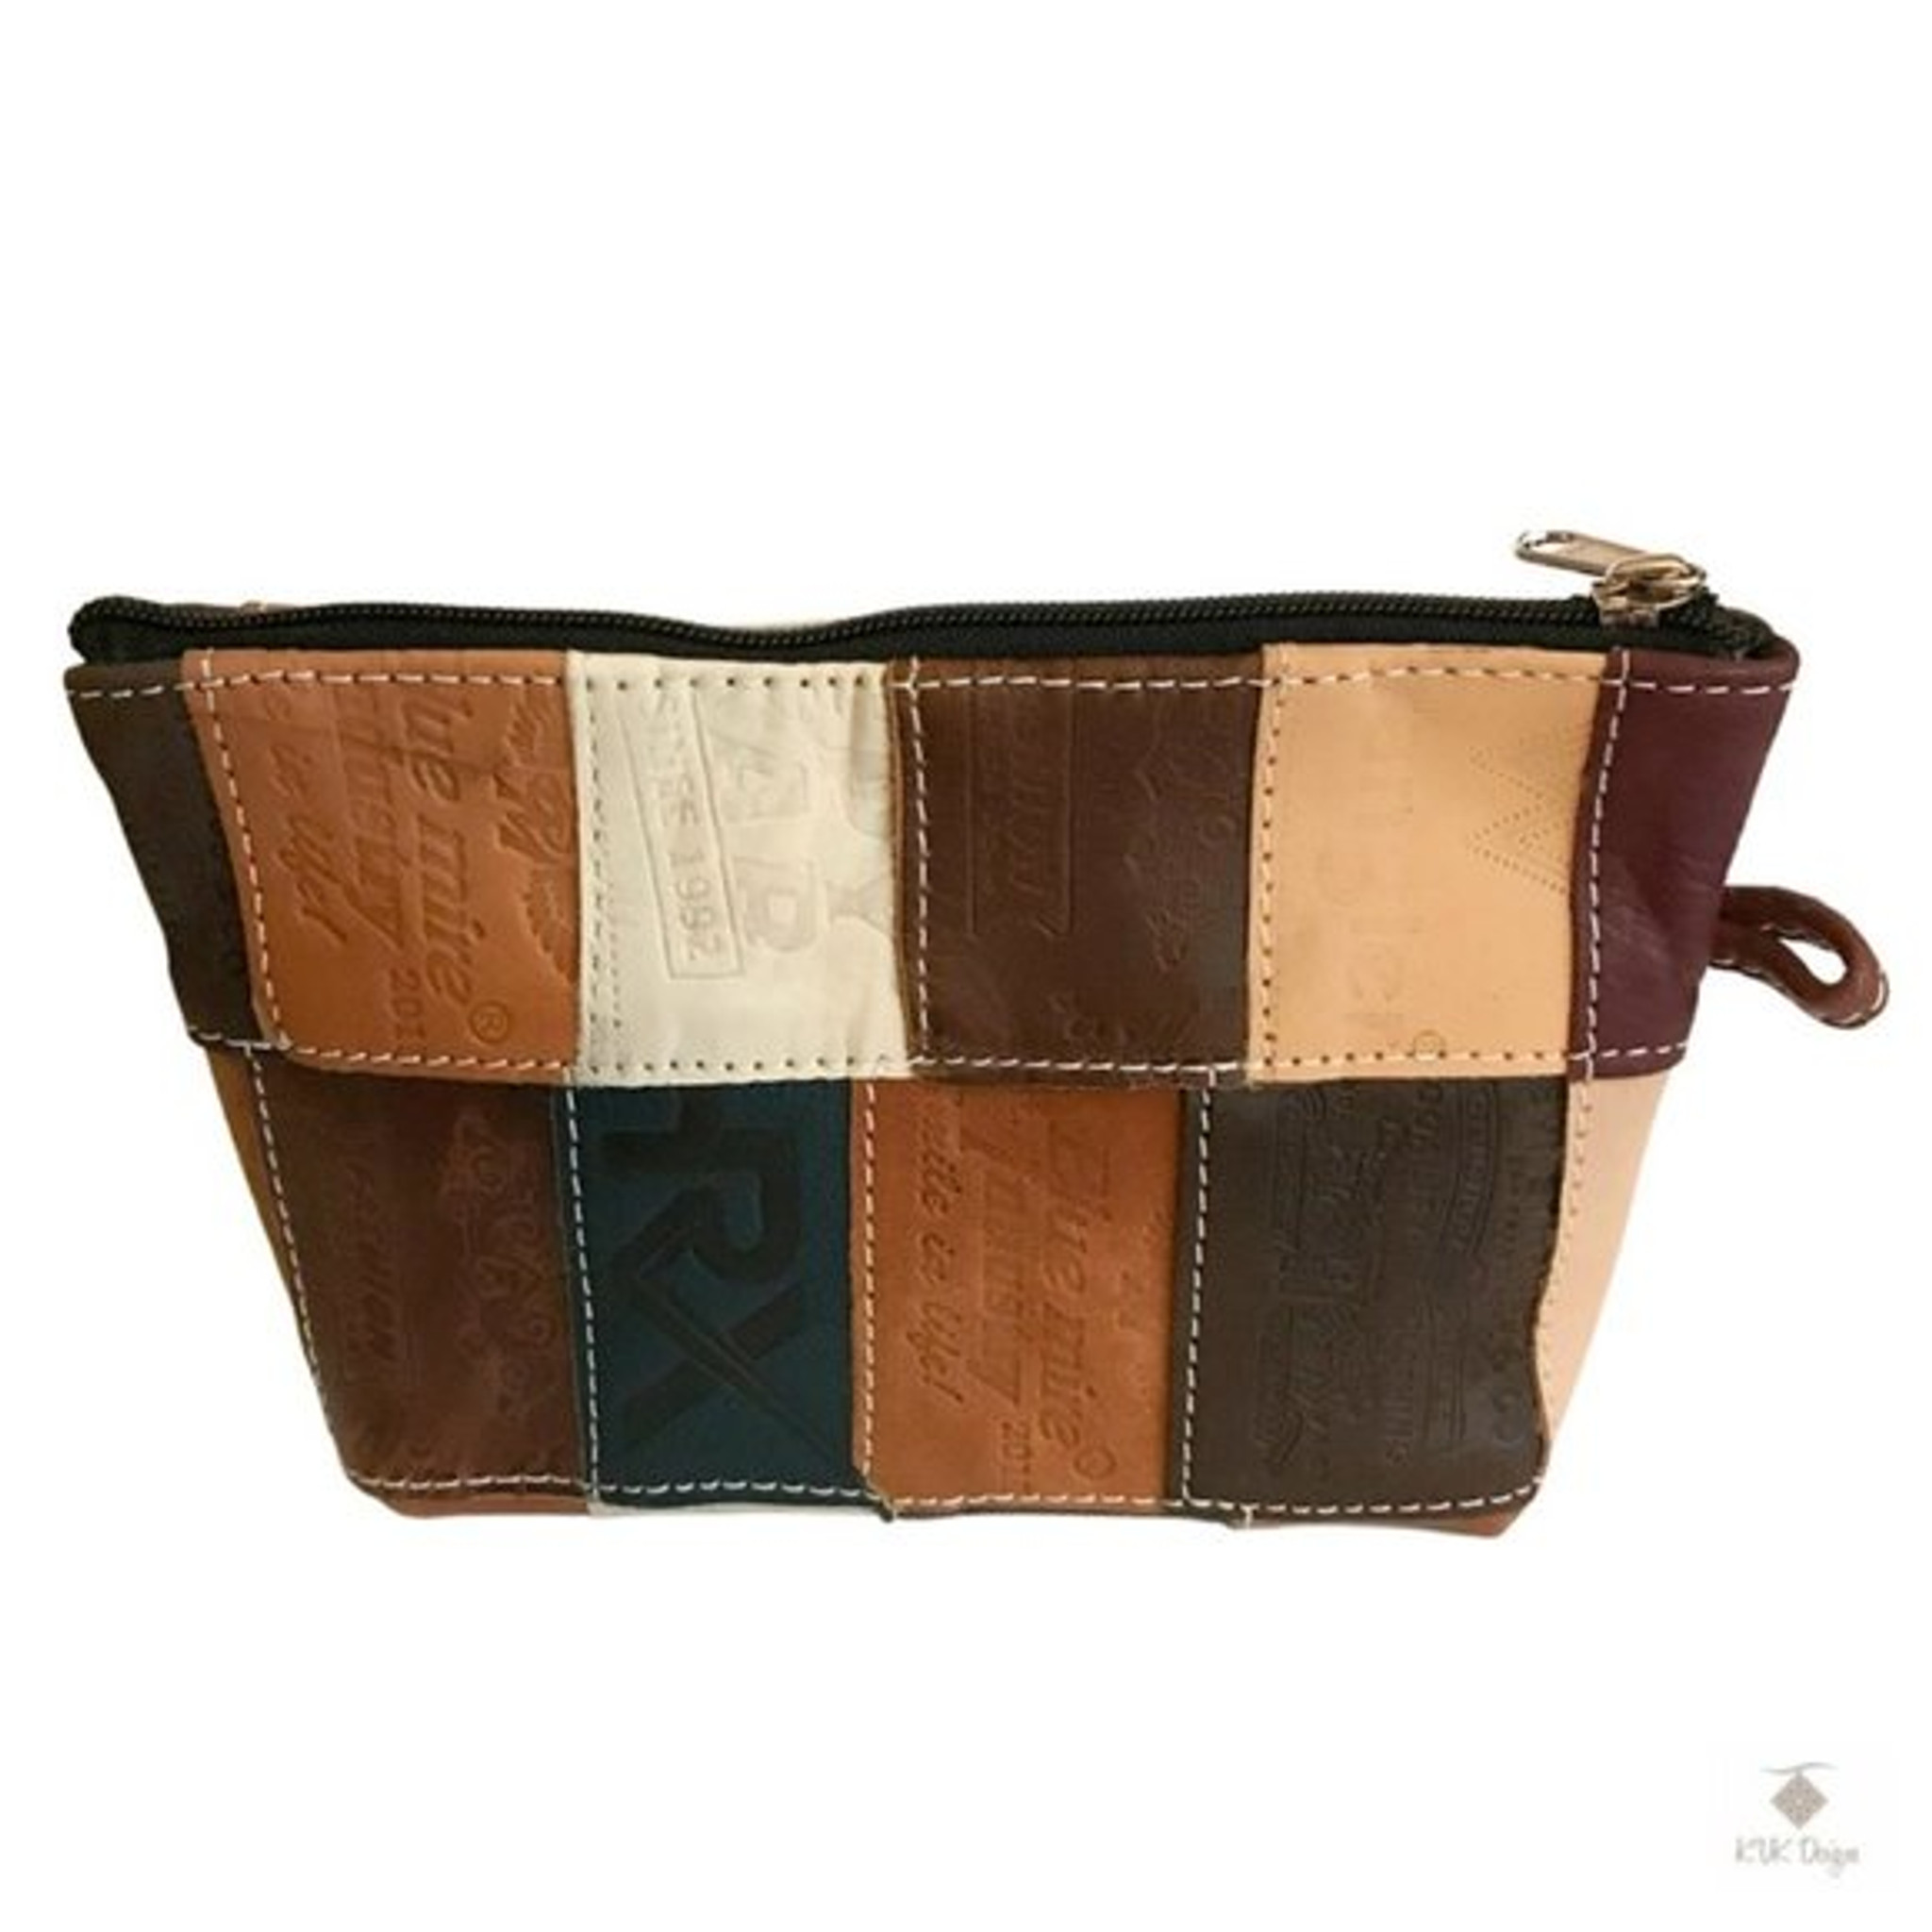 Buy Multi Color Patch Work Genuine Sheep Leather Tote Bag at ShopLC.